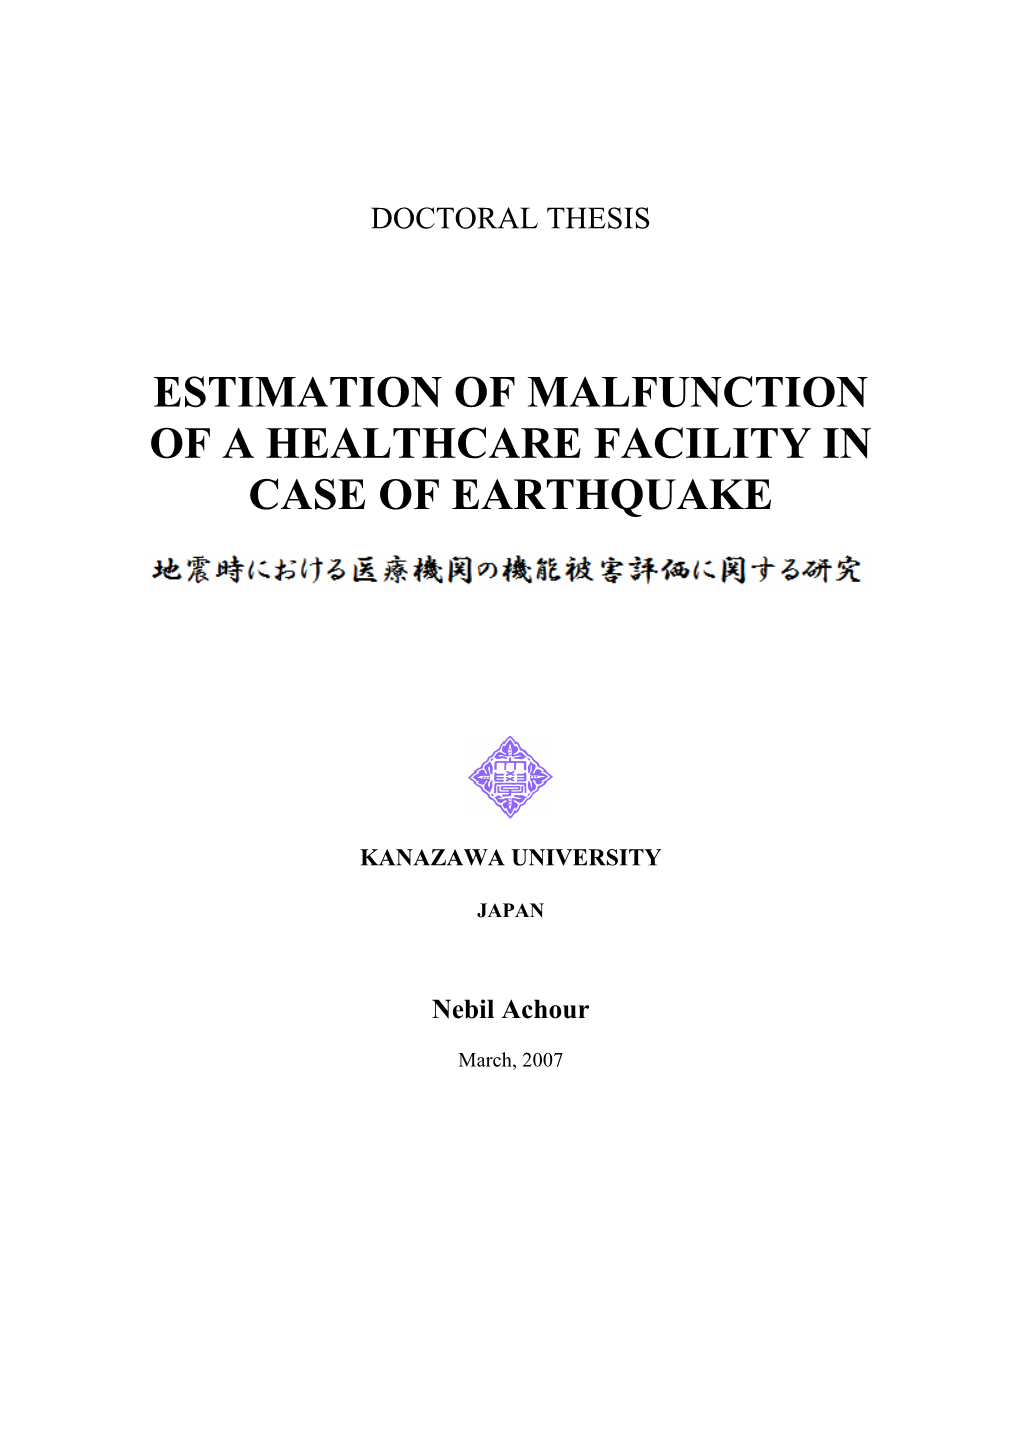 Estimation of Malfunction of a Healthcare Facility in Case of Earthquake